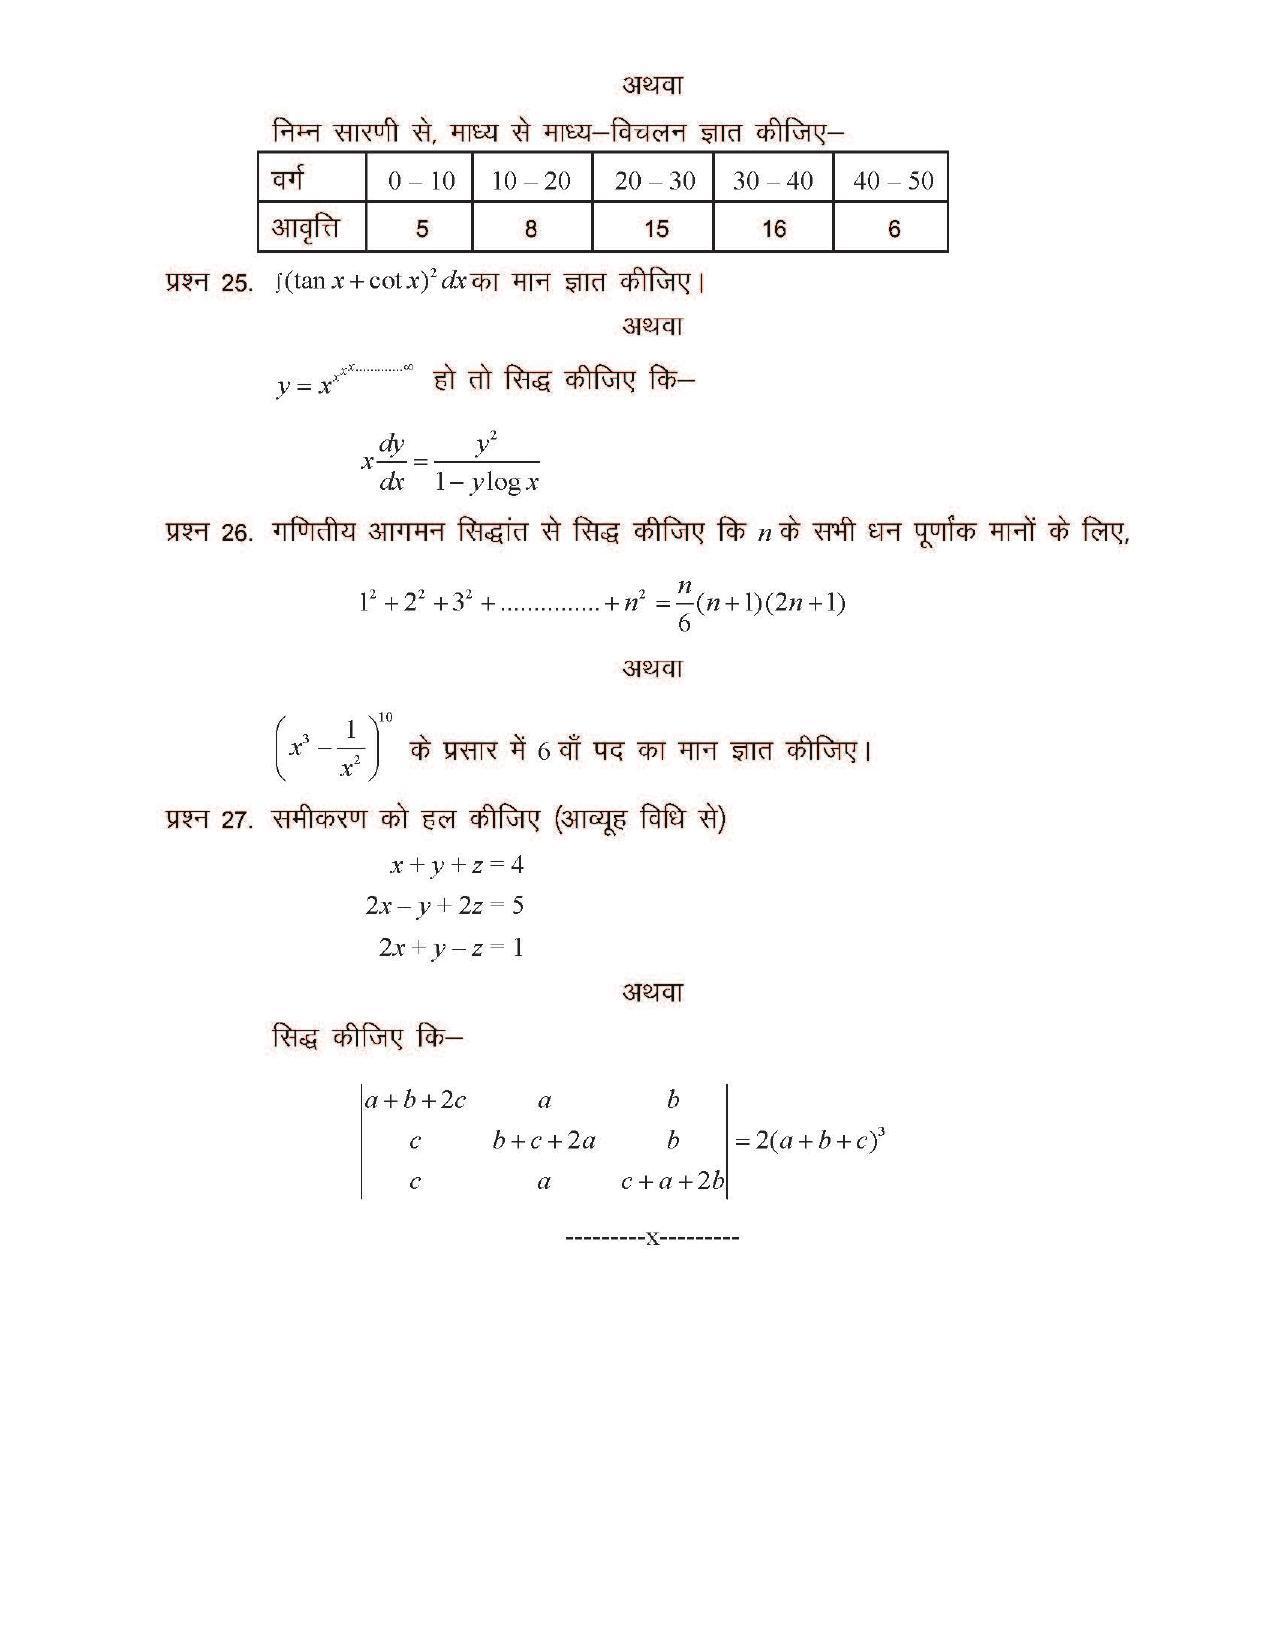 CGSOS Class 12 Model Question Paper - Maths - II - Page 5